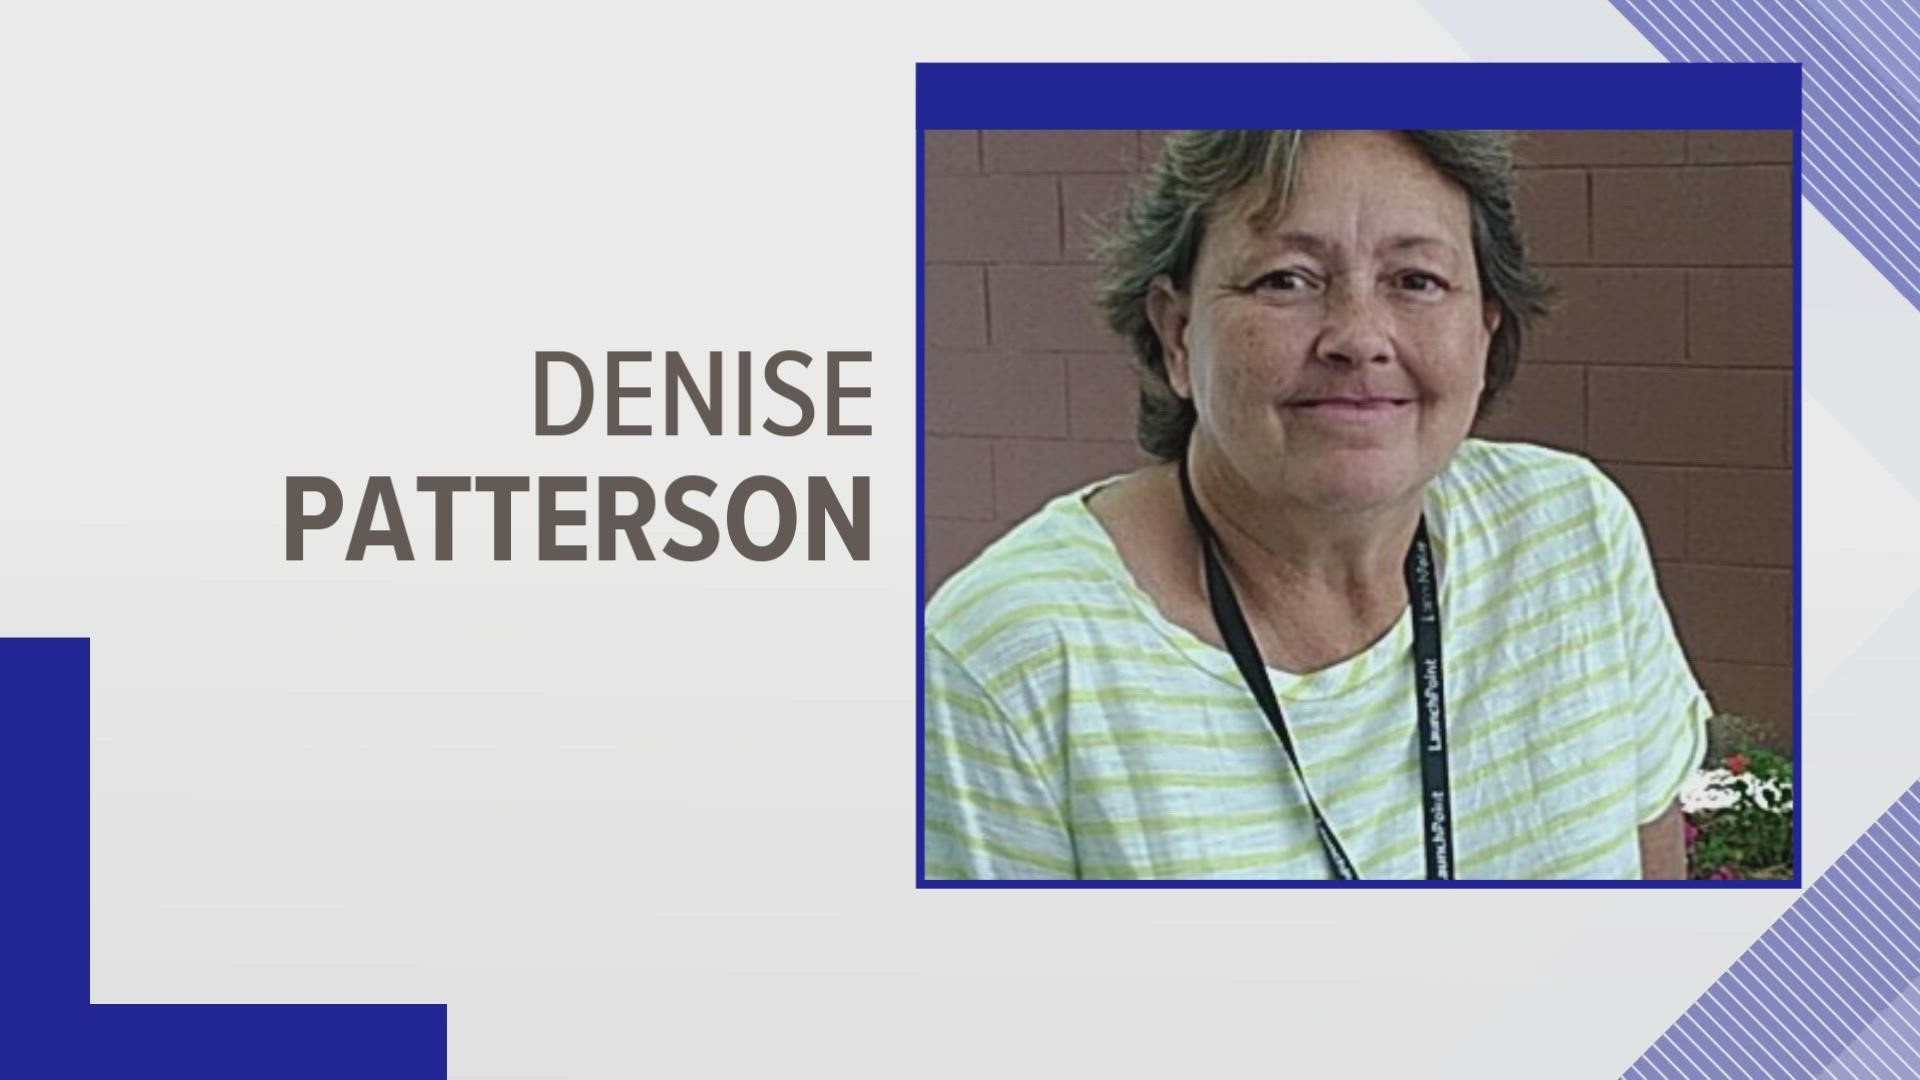 KPD said 51-year-old Denise Patterson came from Bradley Co. to Knoxville a few months ago to visit a dying family member. She was last seen leaving KARM on June 30.